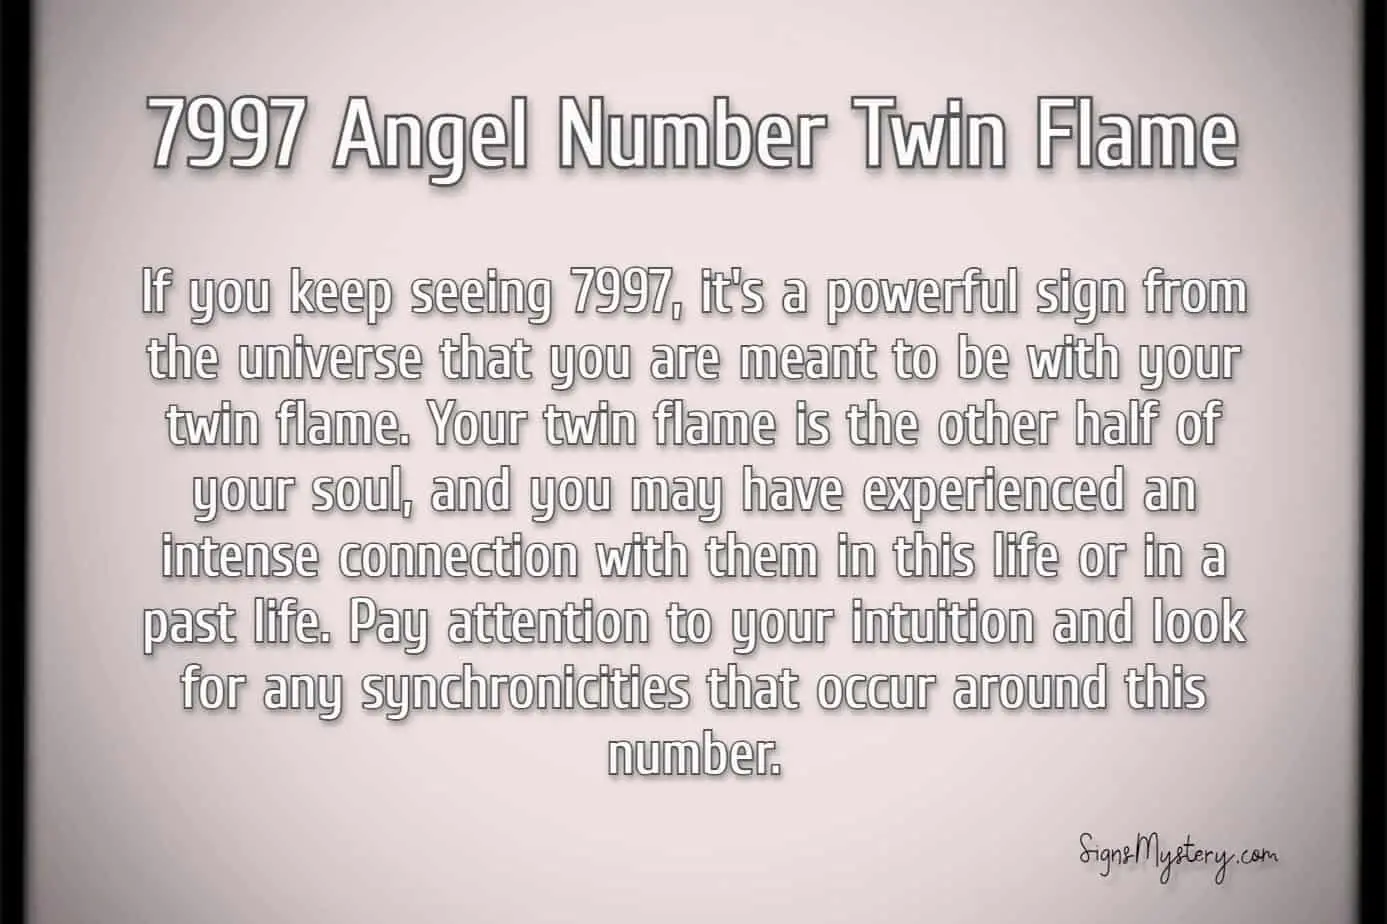 7997 angel number twin flame